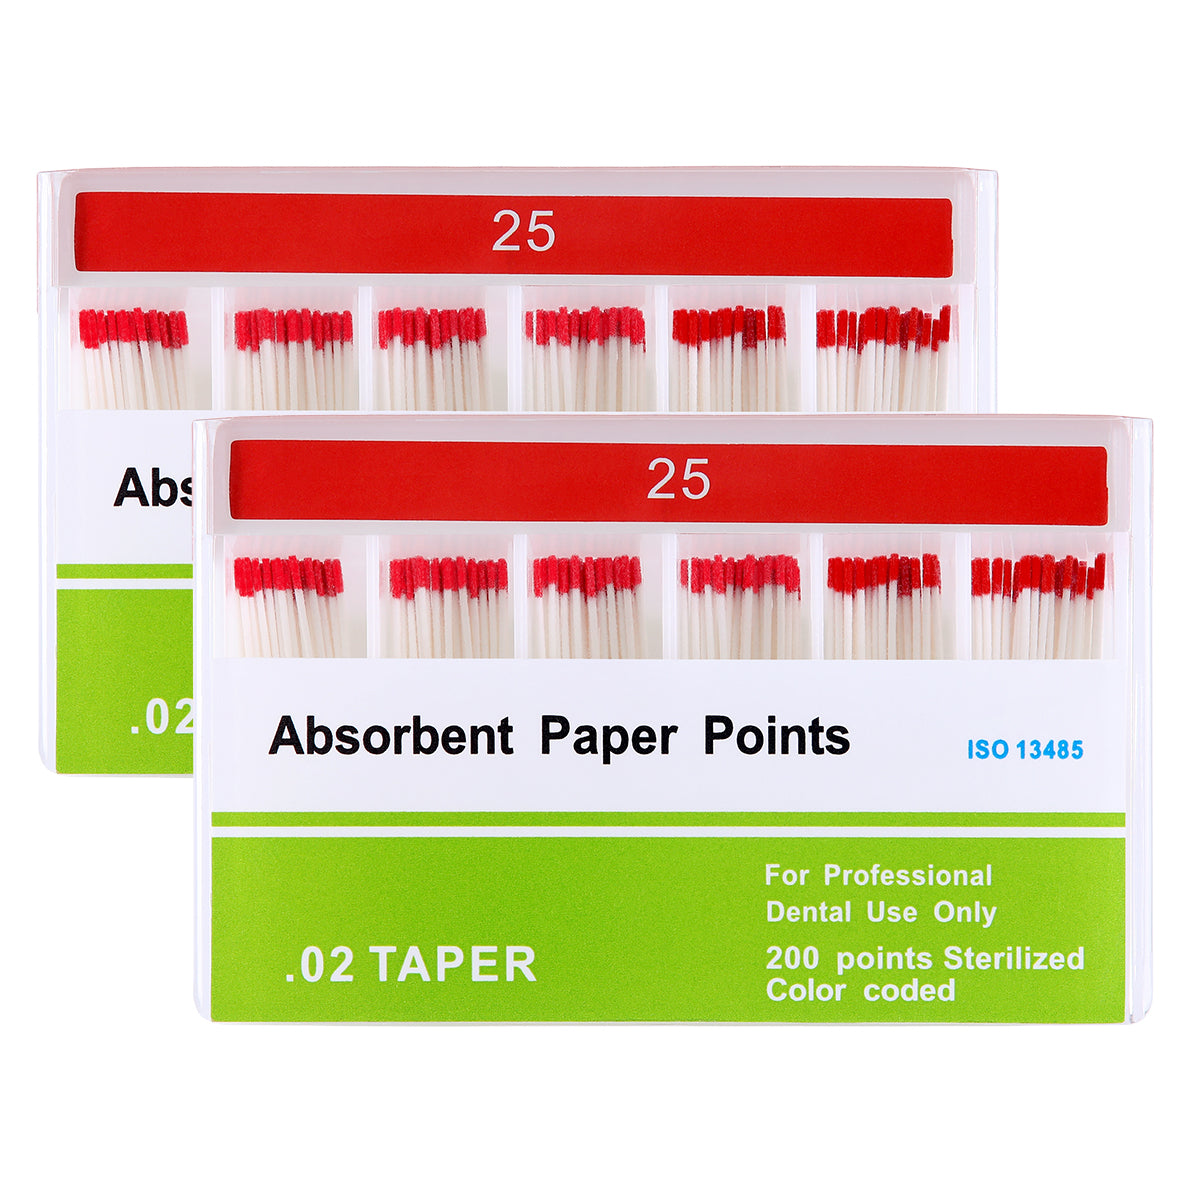 2 Boxes Absorbent Paper Points #25 Taper Size 0.02 Color Coded 200/Box - azdentall.com